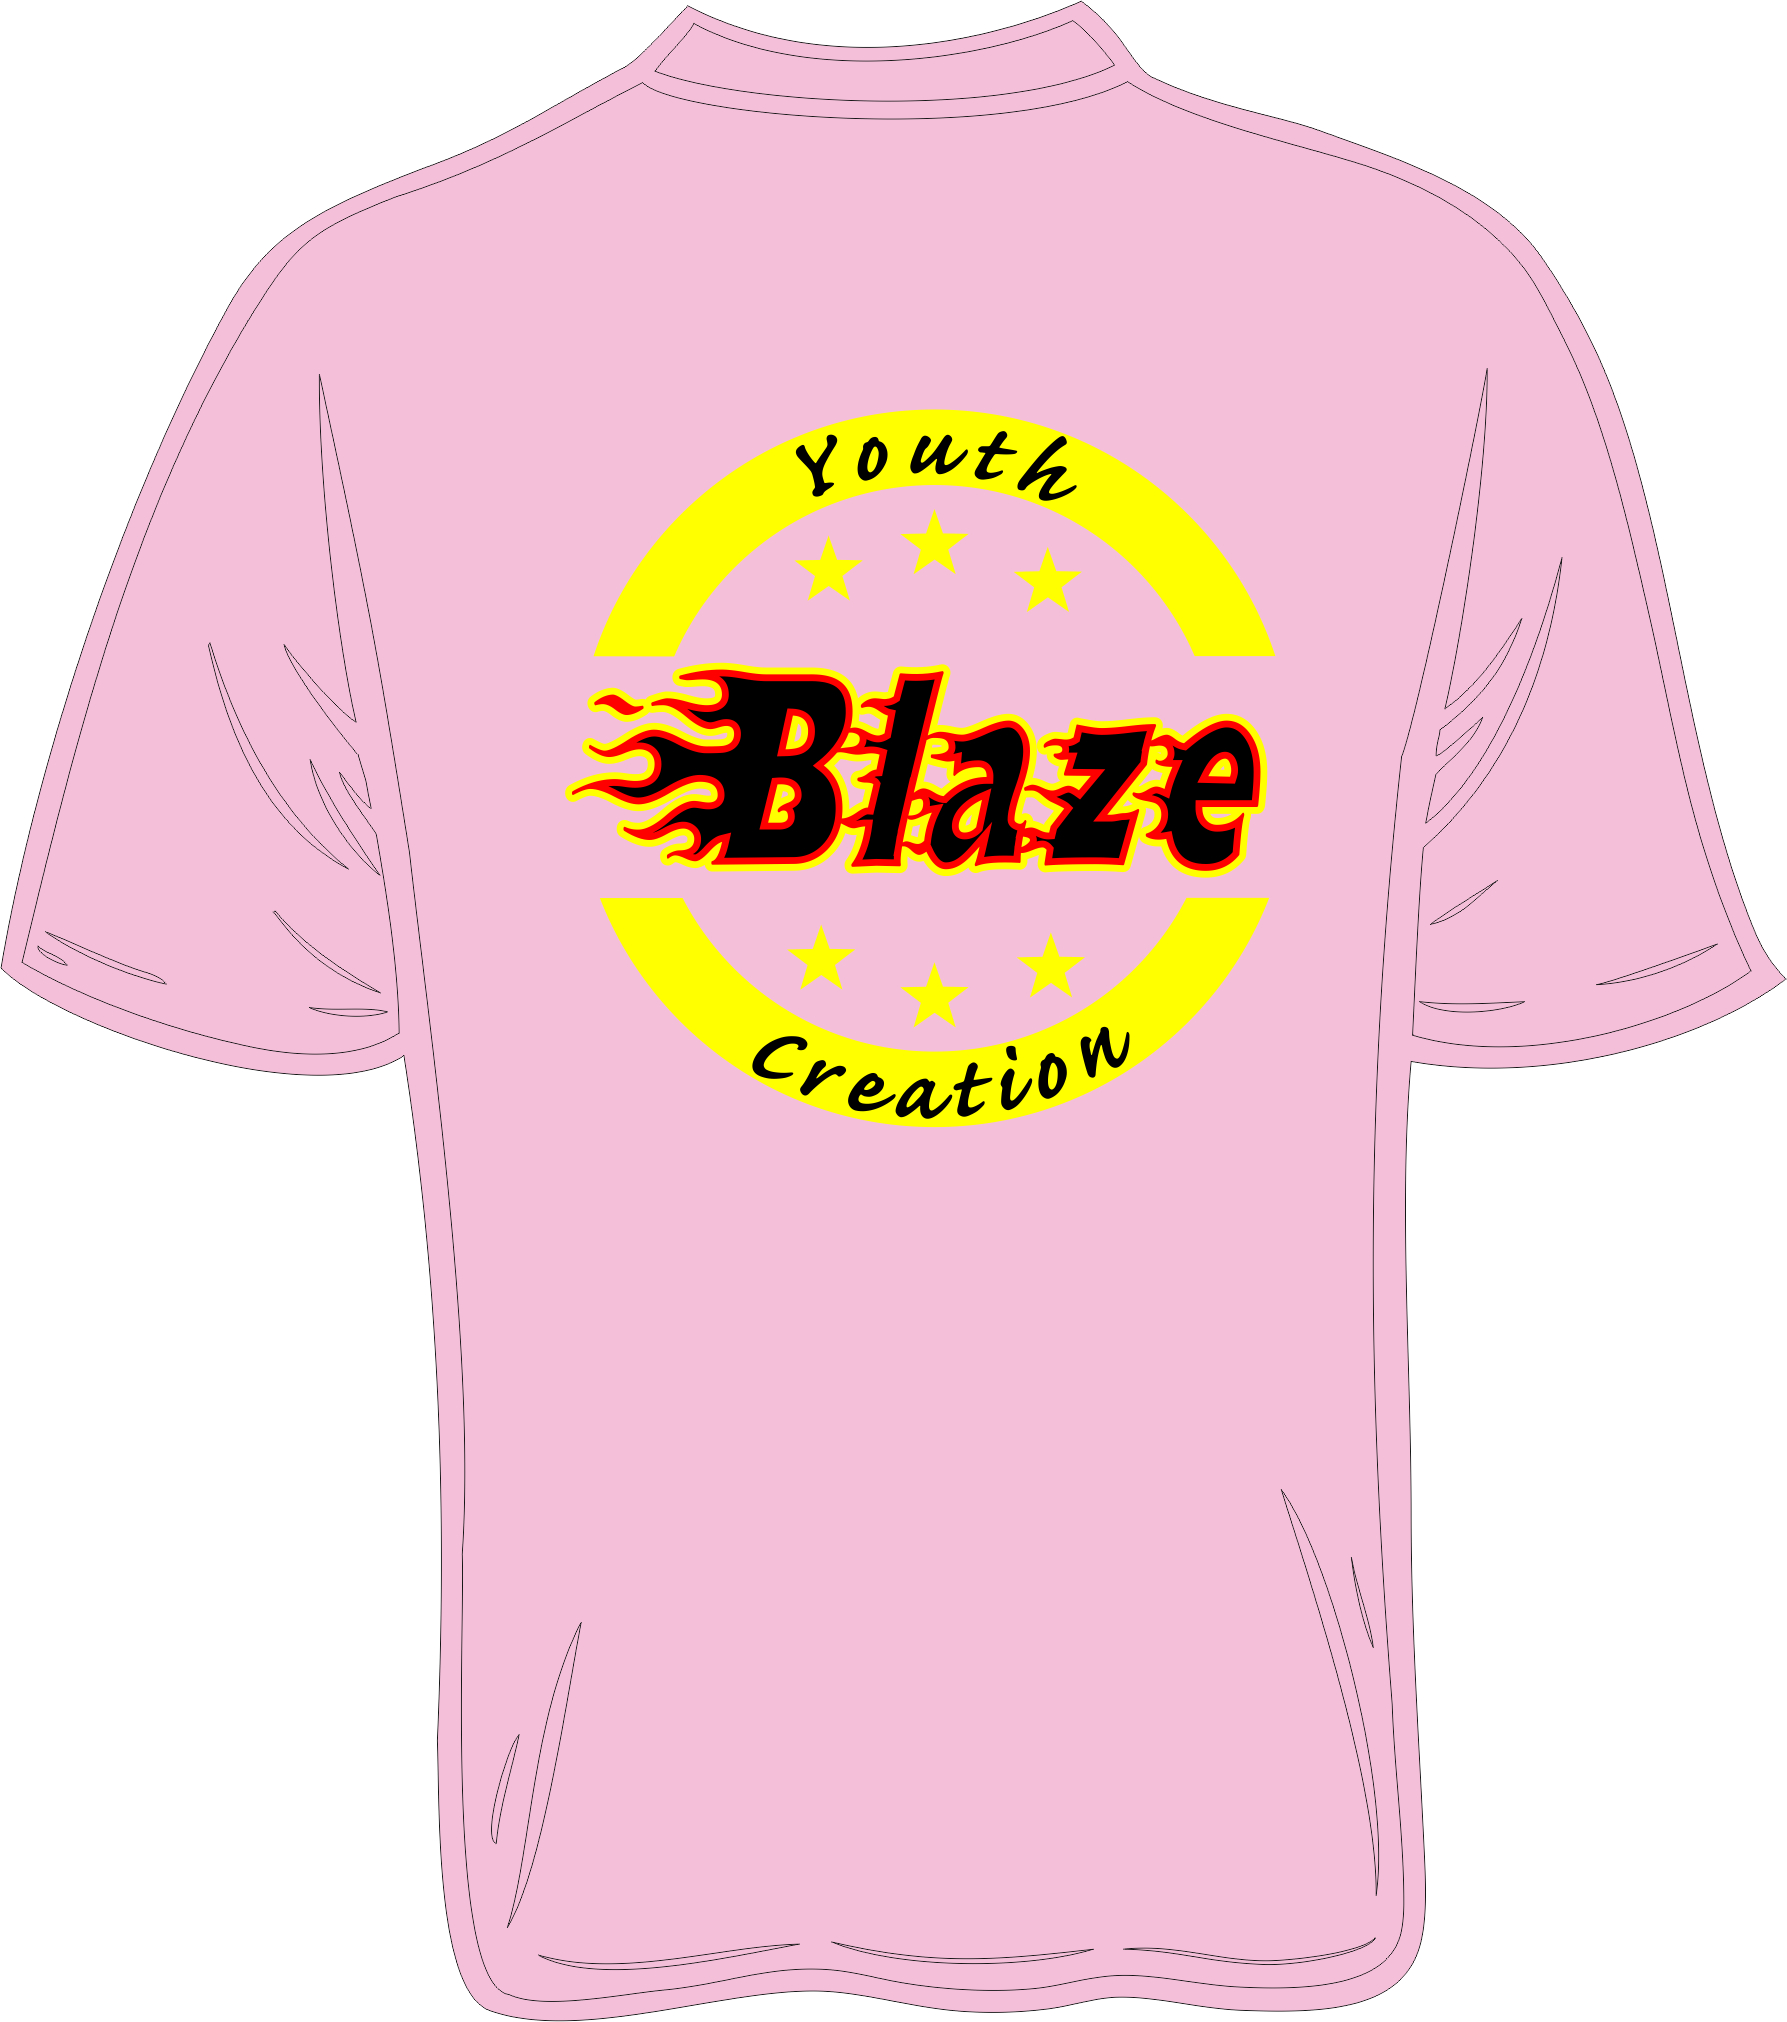 Youth Creation Children's Competition Team Tee Shirt